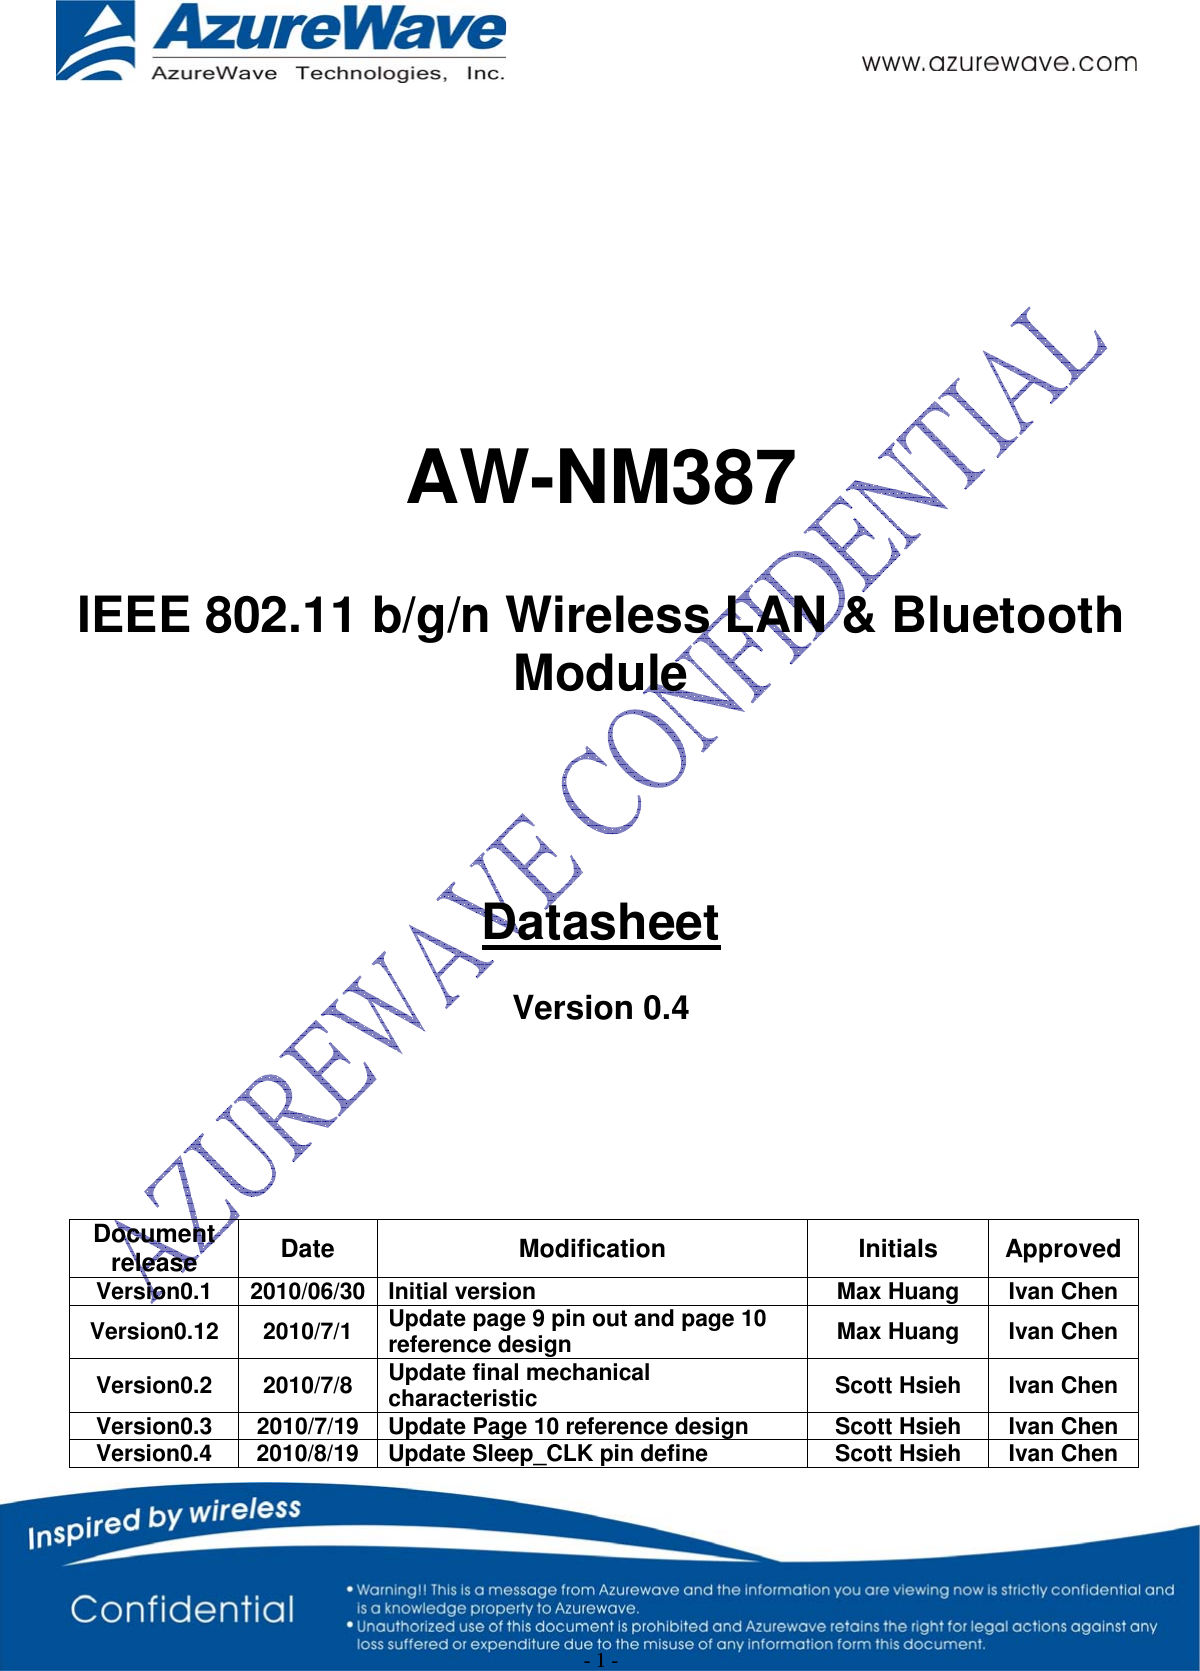  - 1 -      AW-NM387  IEEE 802.11 b/g/n Wireless LAN &amp; Bluetooth  Module     Datasheet  Version 0.4      Document release  Date Modification  Initials Approved Version0.1  2010/06/30  Initial version  Max Huang  Ivan Chen Version0.12 2010/7/1 Update page 9 pin out and page 10 reference design  Max Huang  Ivan Chen Version0.2 2010/7/8 Update final mechanical characteristic  Scott Hsieh  Ivan Chen Version0.3  2010/7/19  Update Page 10 reference design  Scott Hsieh  Ivan Chen Version0.4  2010/8/19  Update Sleep_CLK pin define  Scott Hsieh  Ivan Chen 